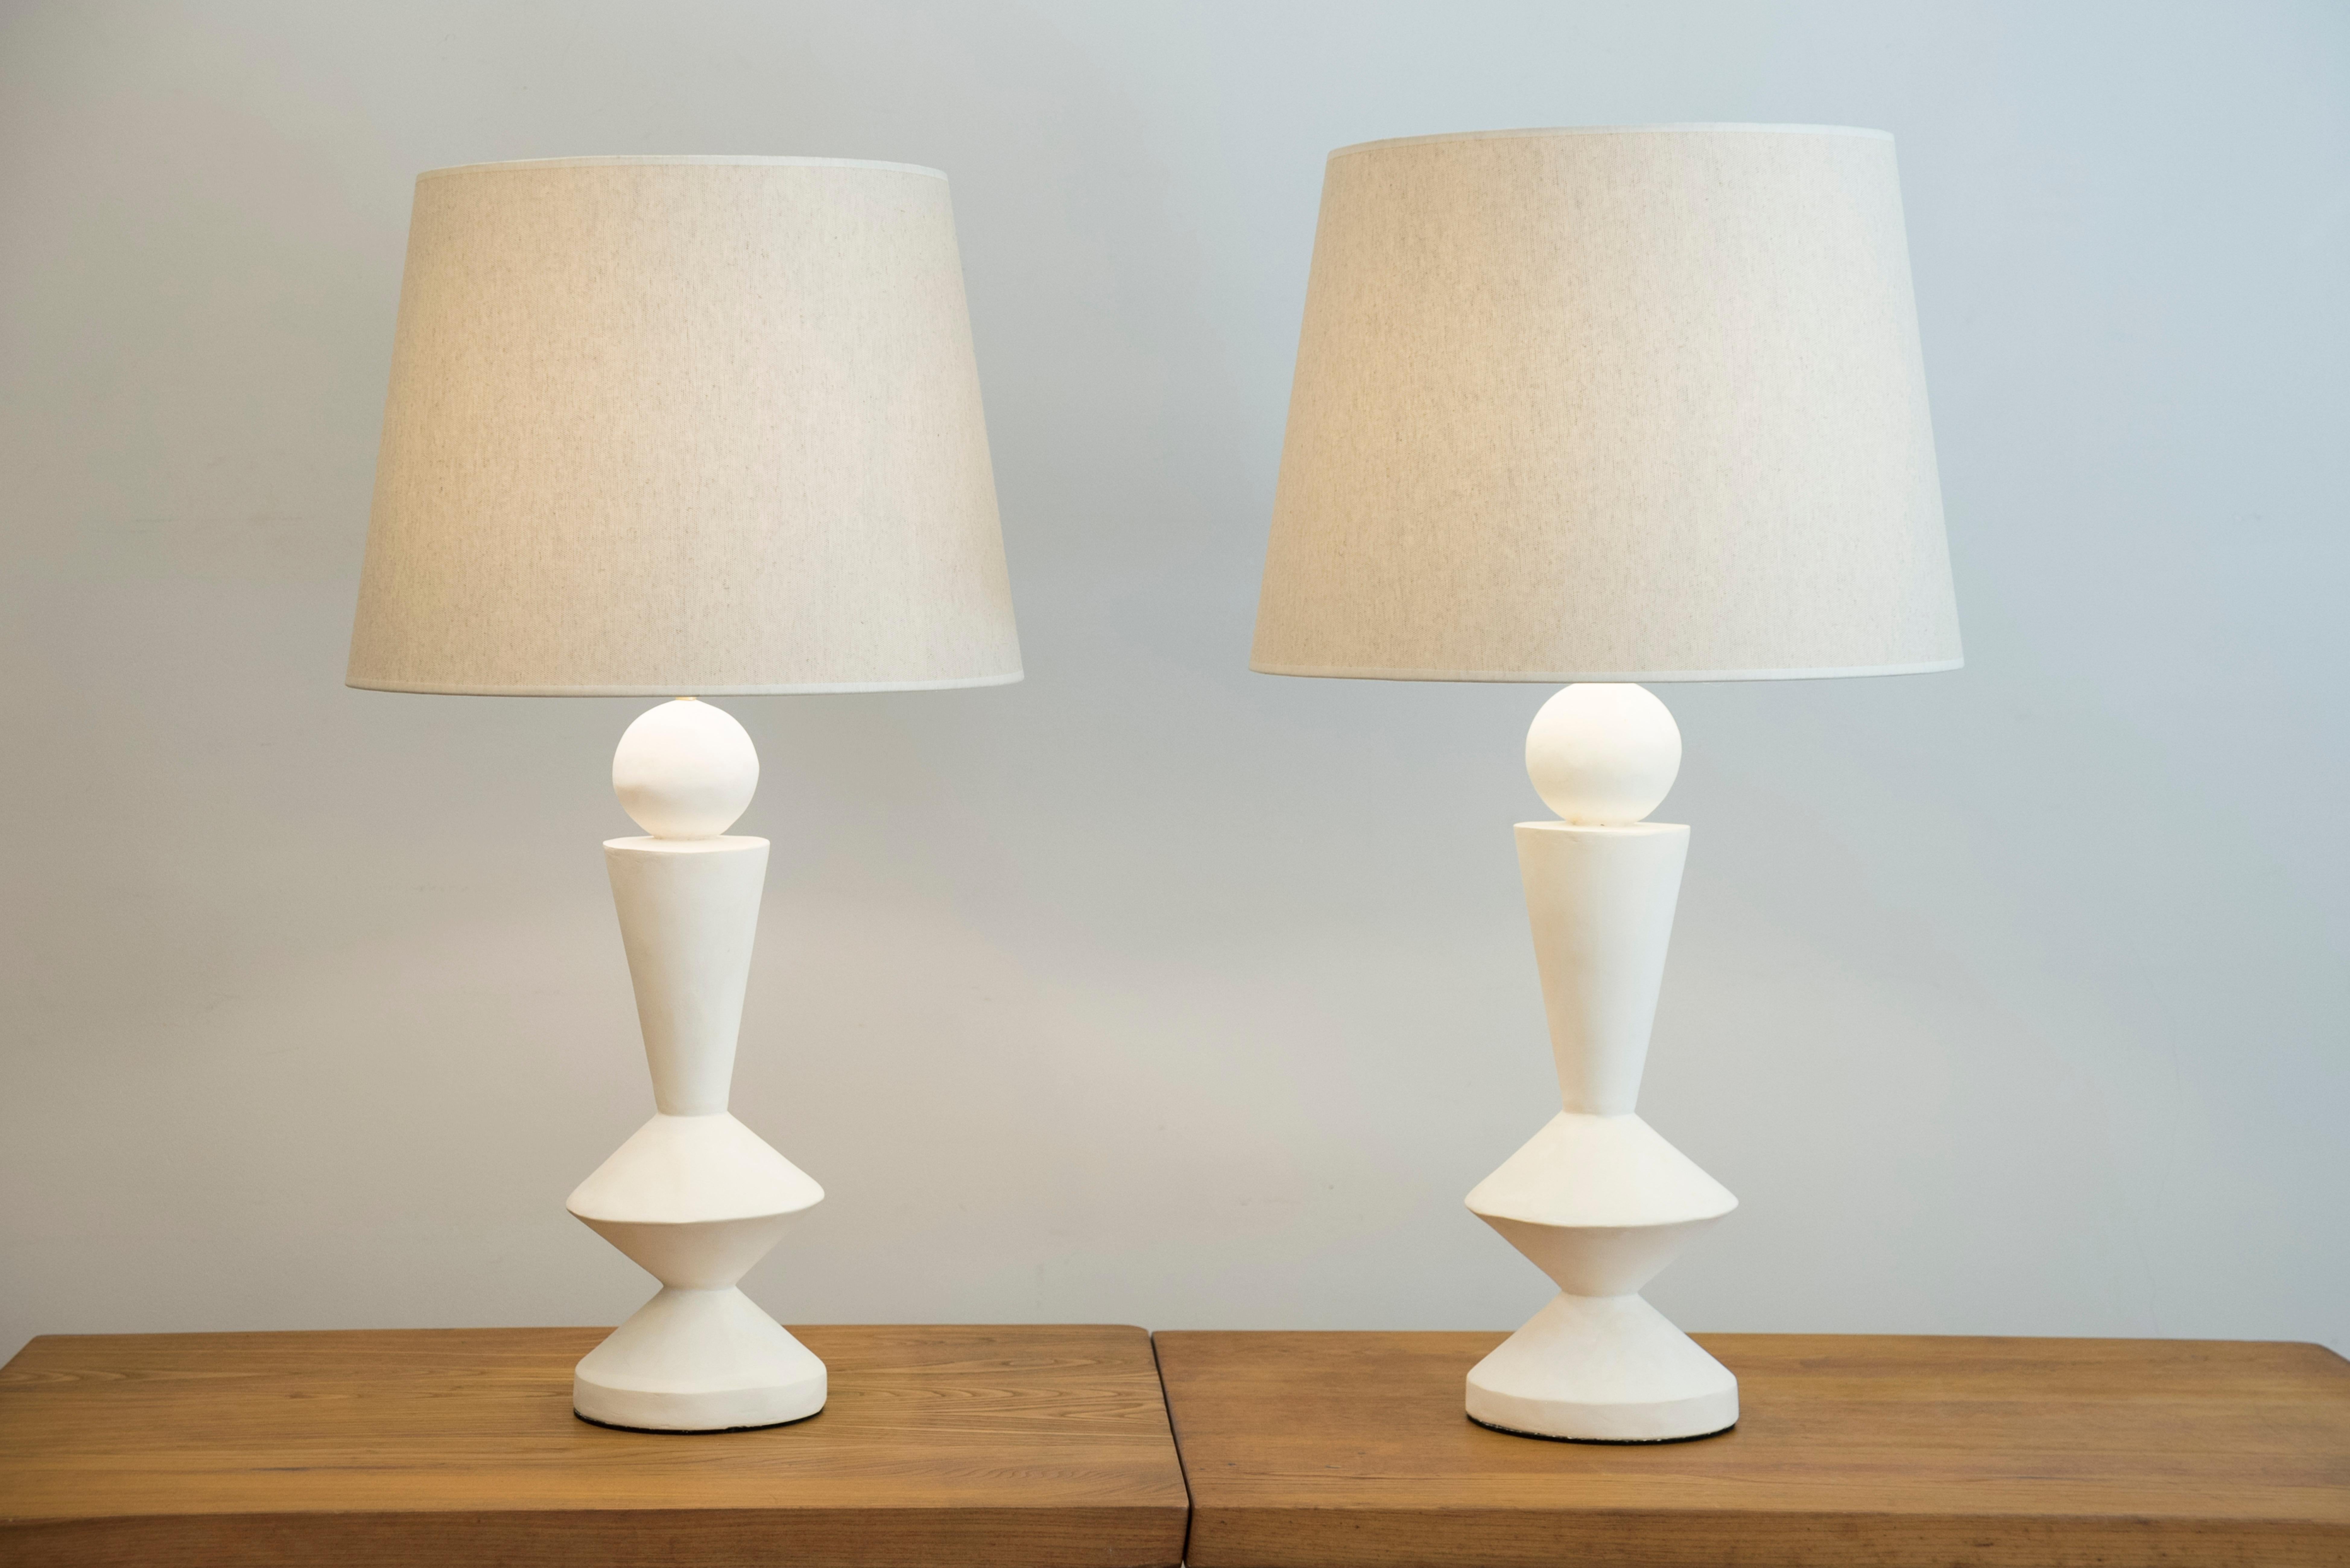 Pair of stuccoed plaster lamps.
Custom made shades.
Inspired by Jean-Michel Frank.
France, modern production.
Model : Diabolo.

Measures: height.
Total 84 cm (33 inches) 
Plaster foot 47 cm (18.5 inches)
Diameter shade 45 cm (17.7 inches).